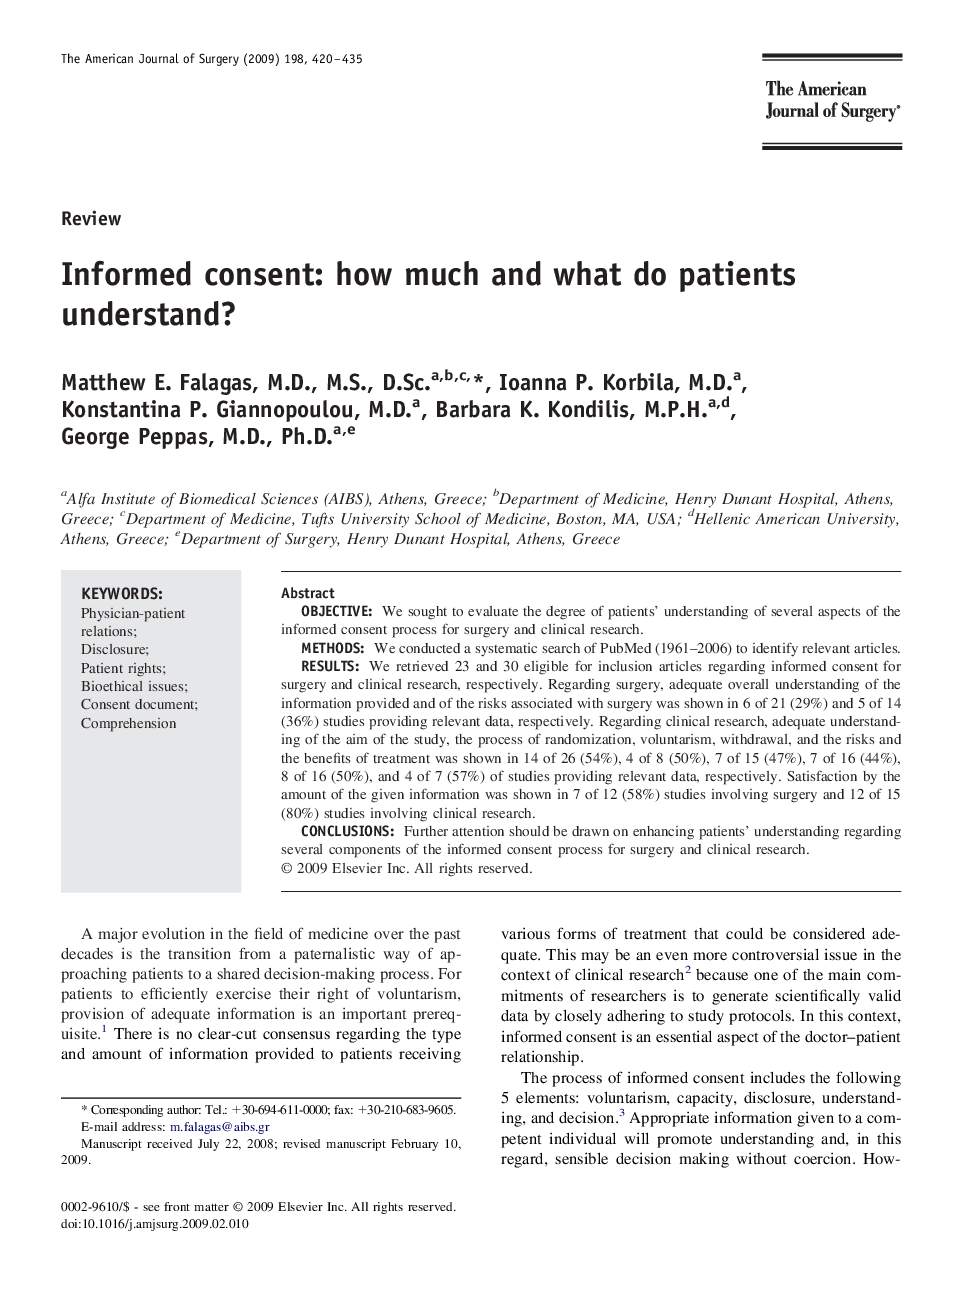 Informed consent: how much and what do patients understand?